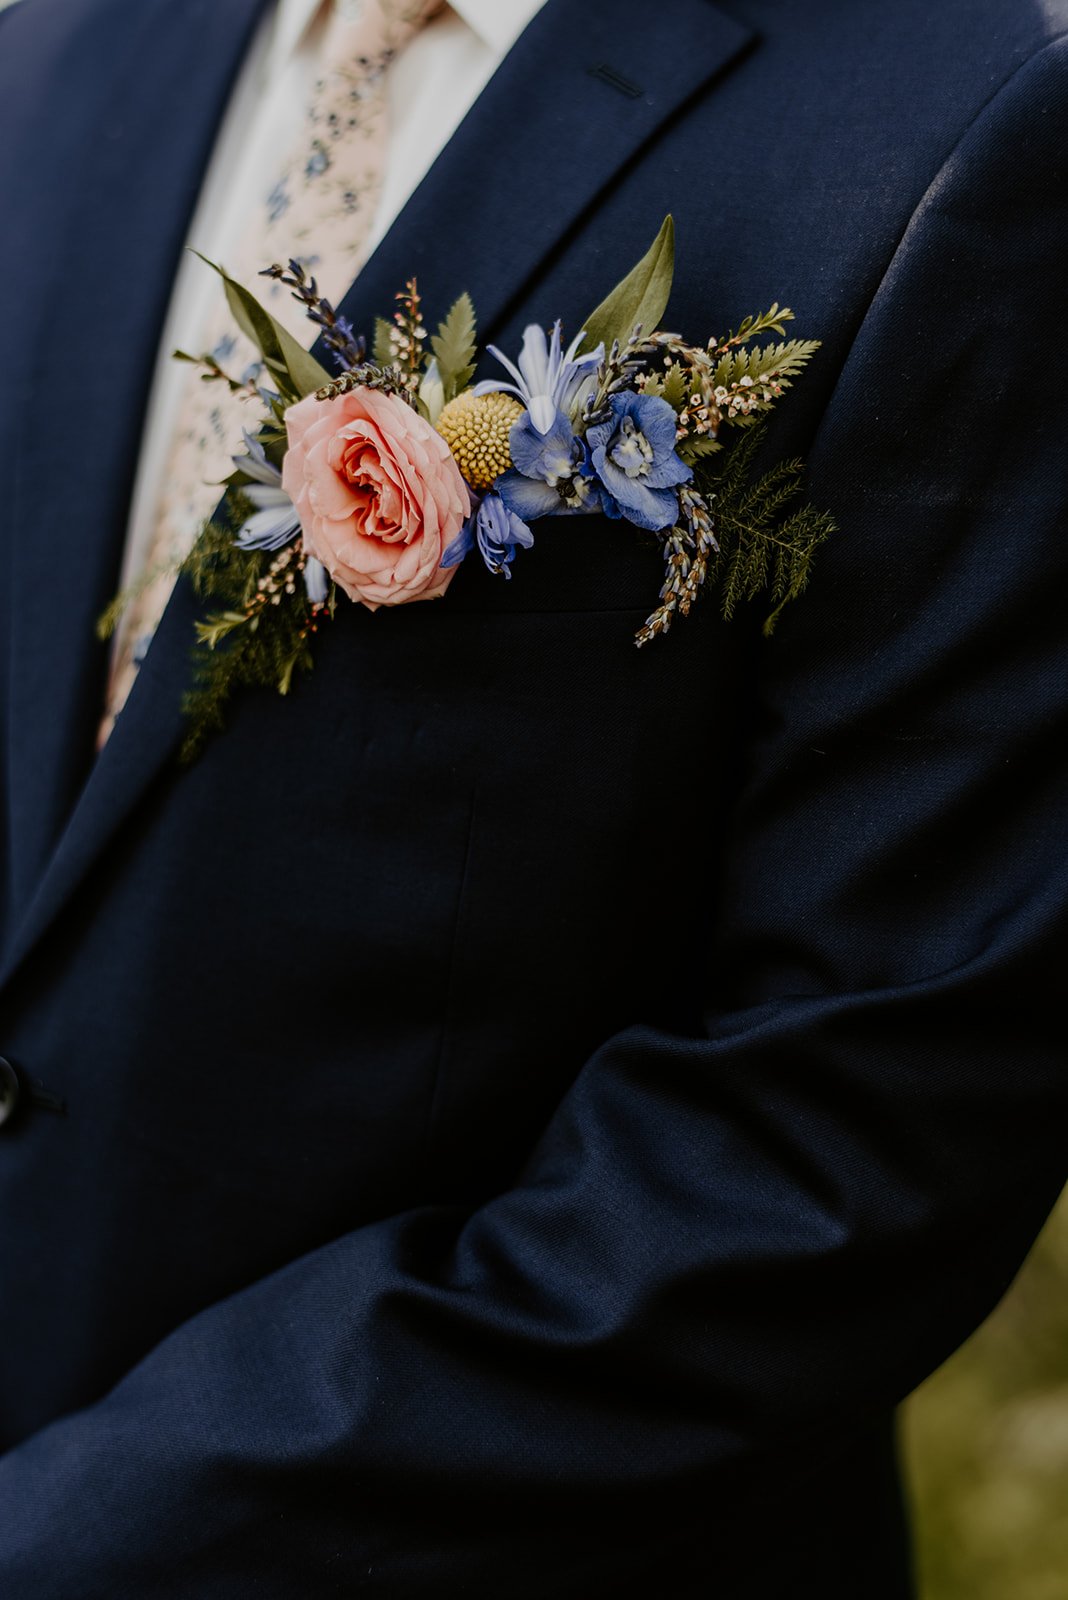 Pocket square boutonnieres have gotten more and more popular this wedding season, and we couldn't be more delighted.